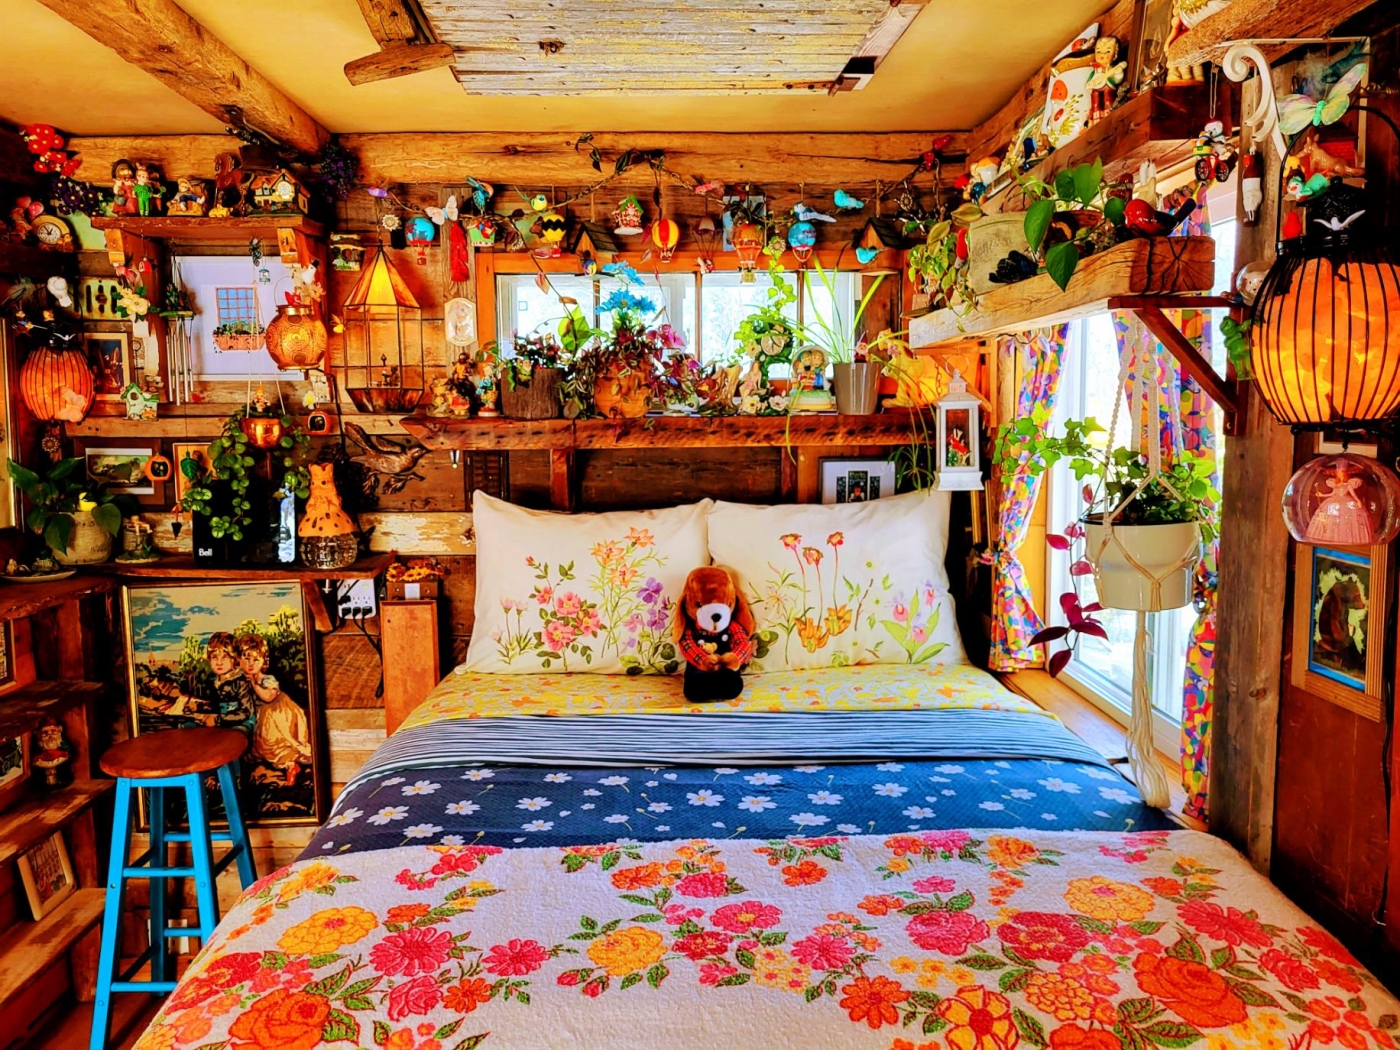 photo of a bedroom with brightly colored decor, lots of wood and decorations